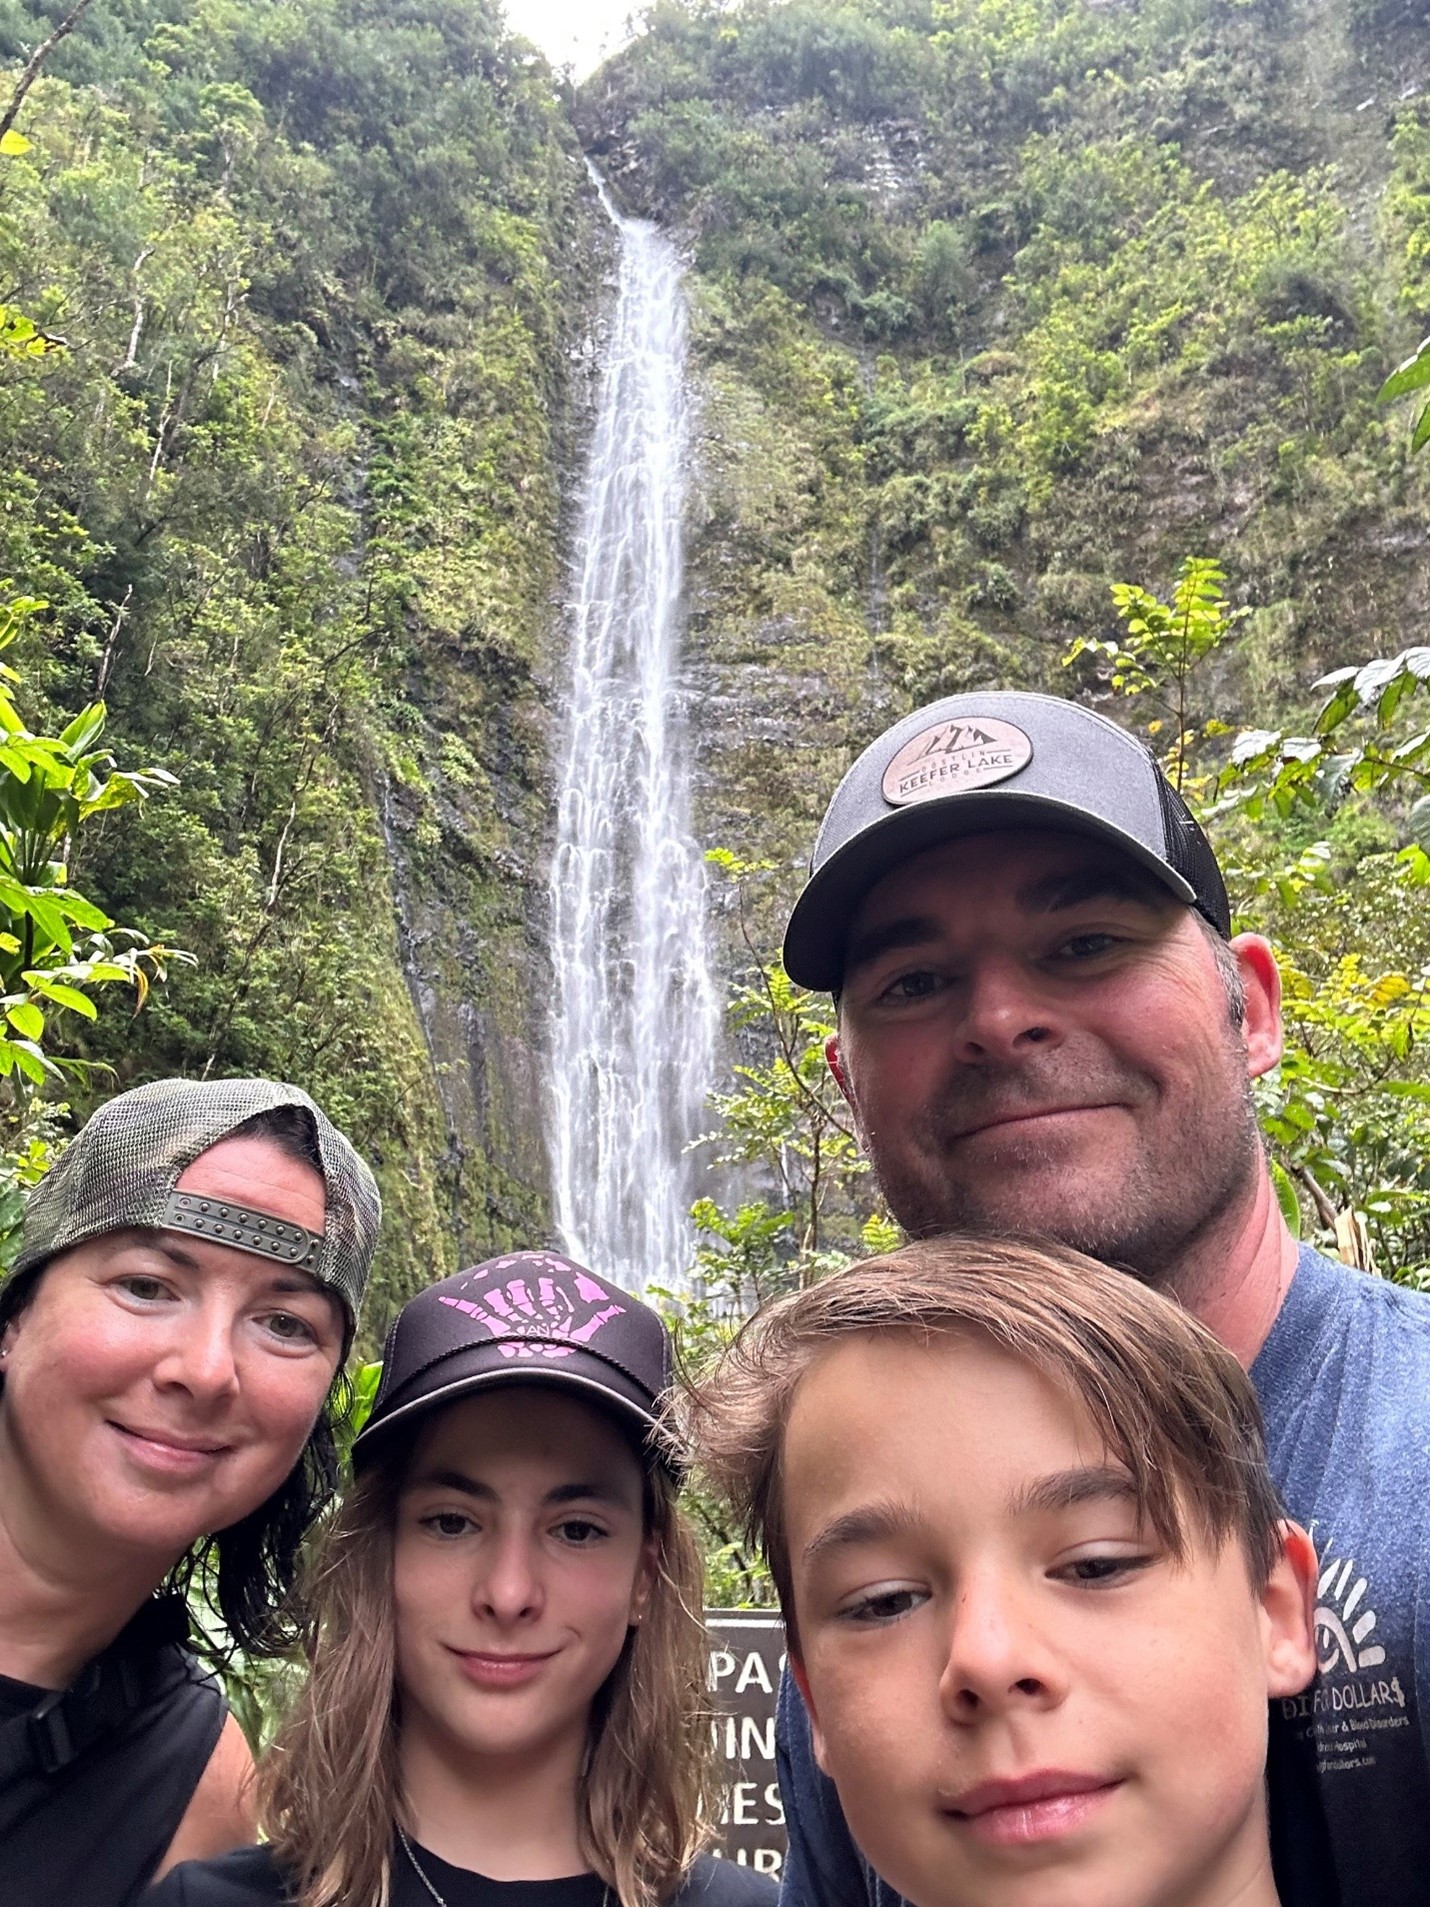 Woman, man, girl, and boy stand in front of waterfall in lush forest